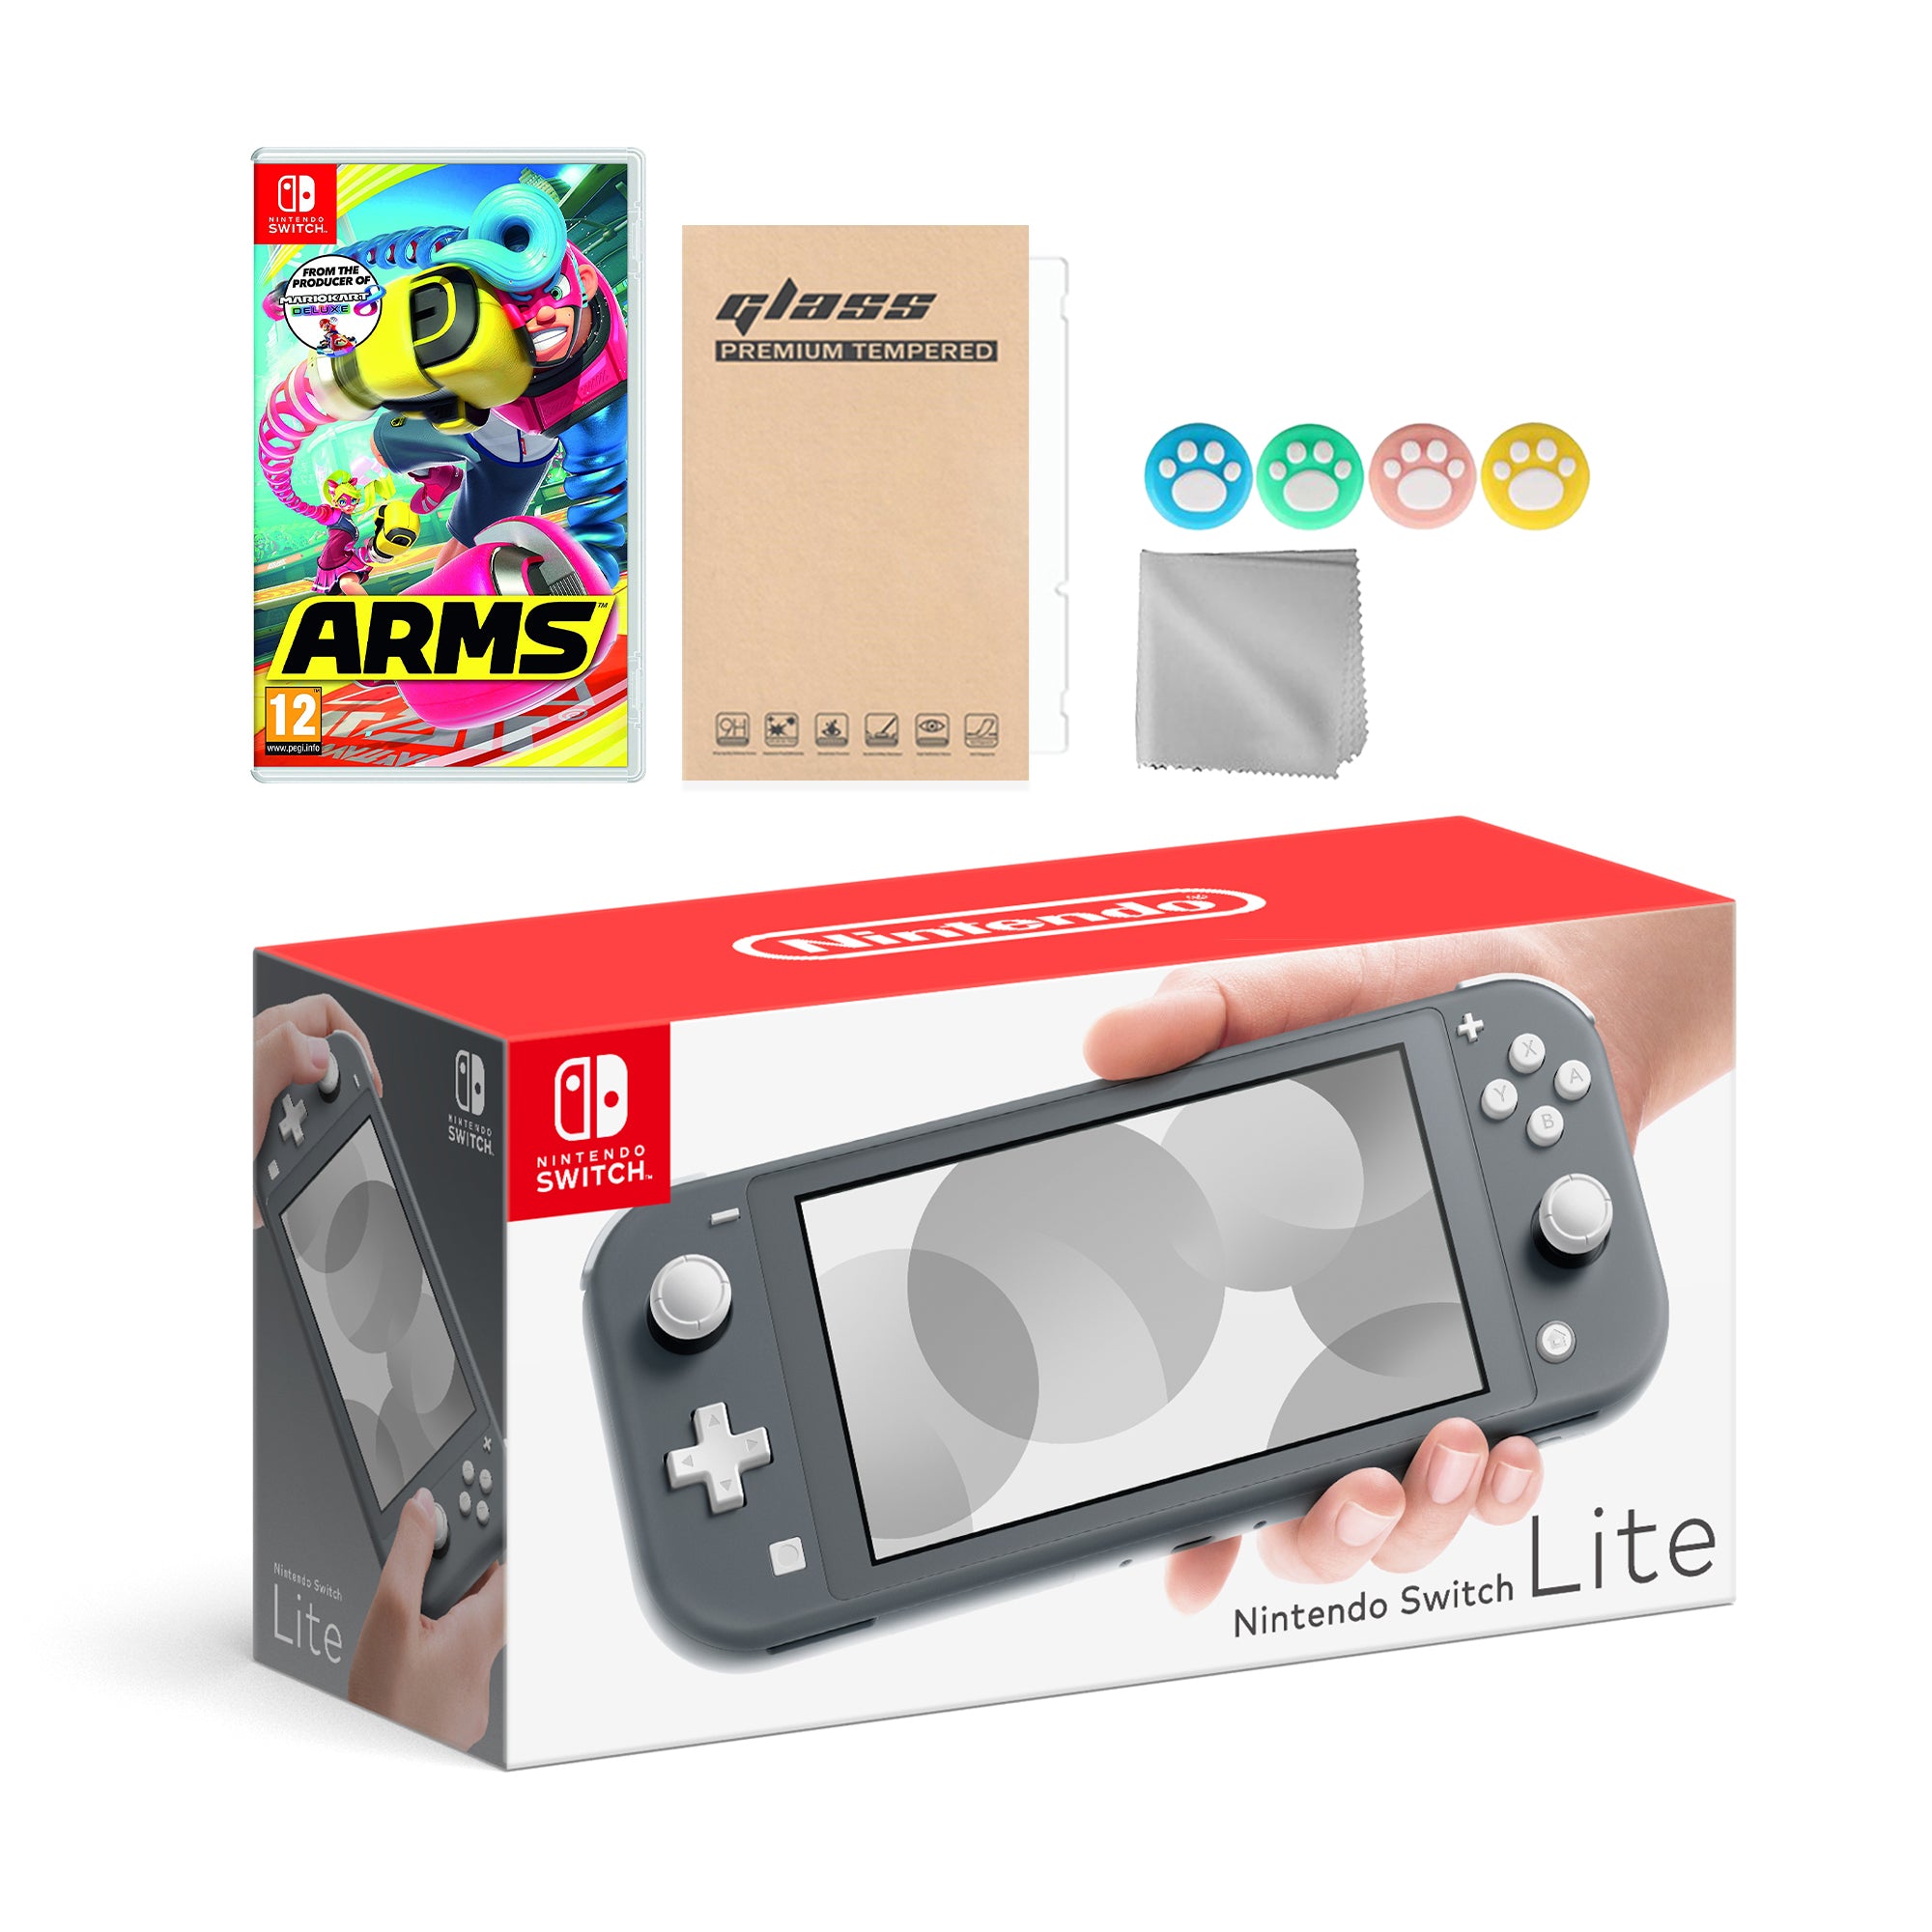 Nintendo Switch Lite Gray with Arms and Mytrix Accessories NS Game Disc Bundle Best Holiday Gift